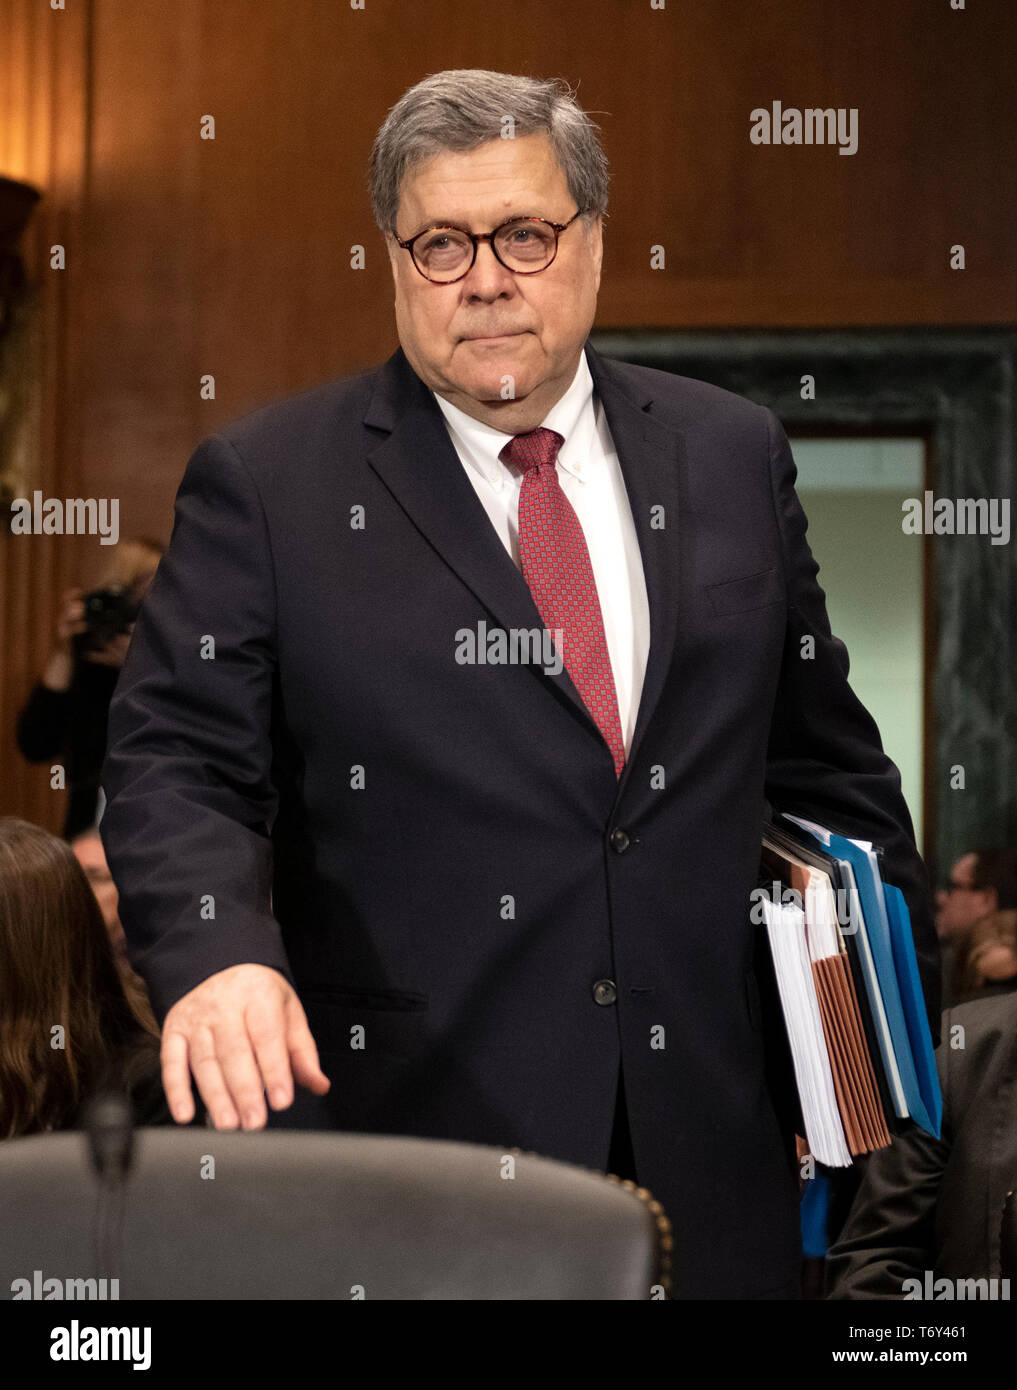 United States Attorney General William P. Barr is sworn-in to give testimony before the US Senate Committee on the Judiciary on the “Department of Justice’s Investigation of Russian Interference with the 2016 Presidential Election” on Capitol Hill in Washington, DC on May 1, 2019. The hearing will begin to answer questions about how the DOJ handled the conclusions from the Mueller probe.  Credit: Ron Sachs / CNP/ MediaPunch RESTRICTION: No New York Metro or other Newspapers within a 75 mile radius of New York City Stock Photo